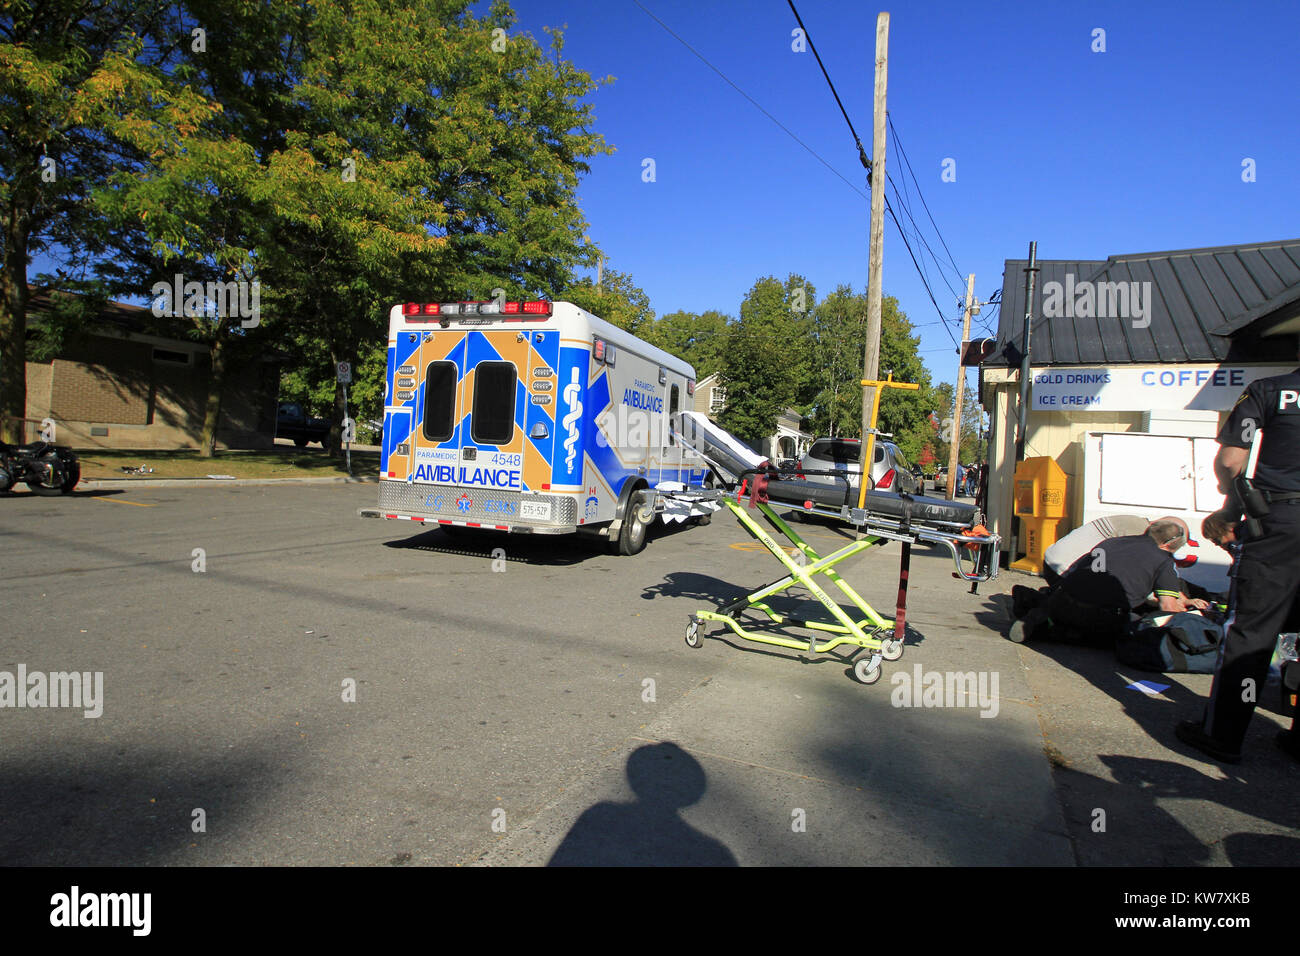 An ambulance at an accident scenej Stock Photo